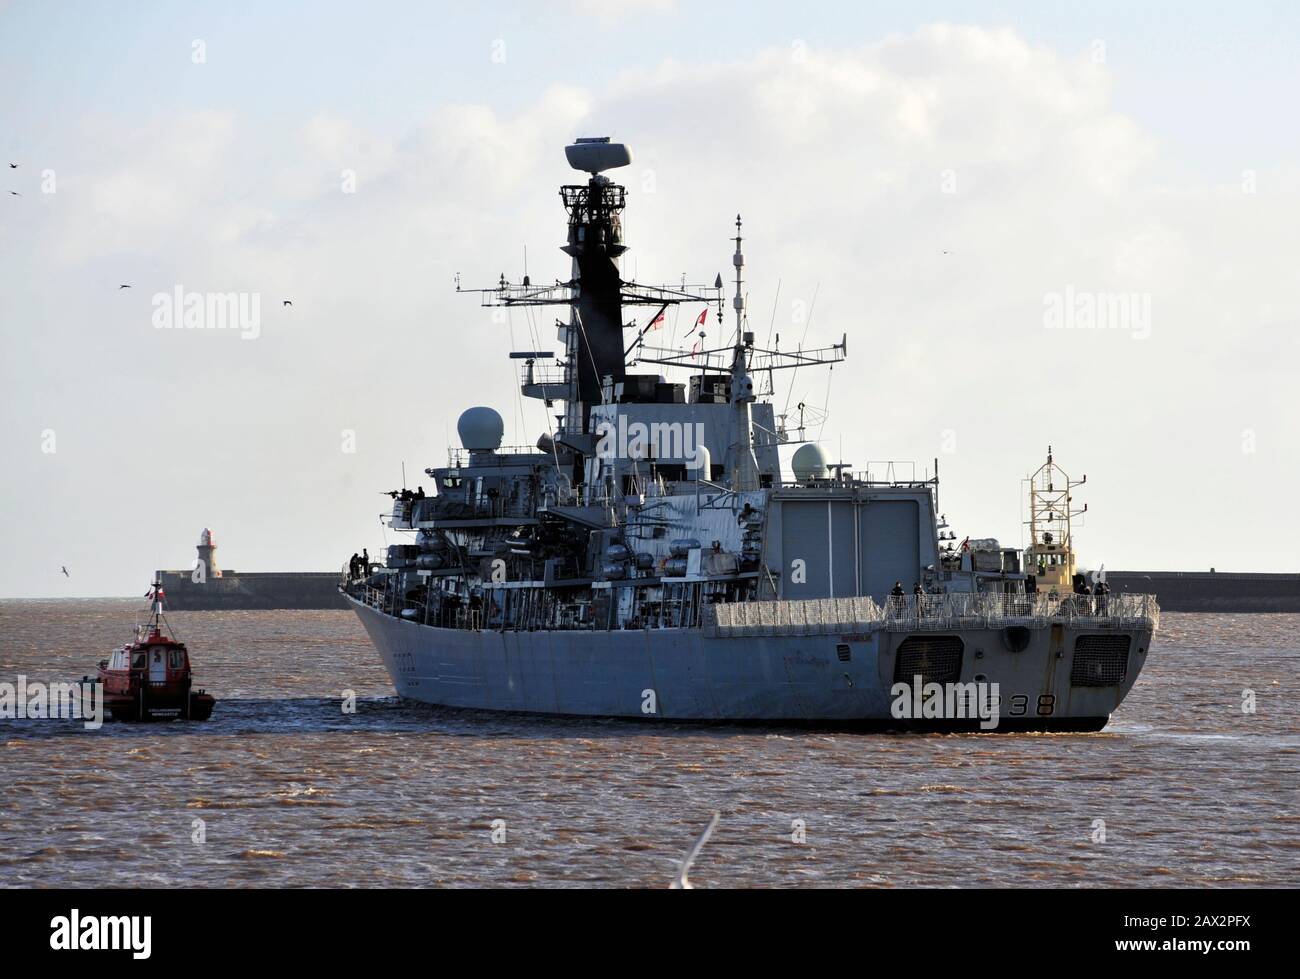 AJAXNETPHOTO. 10TH FEBRUARY, 2020. PORT OF TYNE, ENGLAND. - FRIGATE DEPARTS - TYPE 23 FRIGATE HMS NORTHUMBRLAND DEPARTS TYNESIDE AFTER A GOODWILL VISIT. DEPARTURE SCHEDULED FOR SUNDAY 9TH FEB WAS DELAYED DUE STORM CIARA. PHOTO:TONY HOLLAND/AJAX REF:DTH201002 38492 Stock Photo